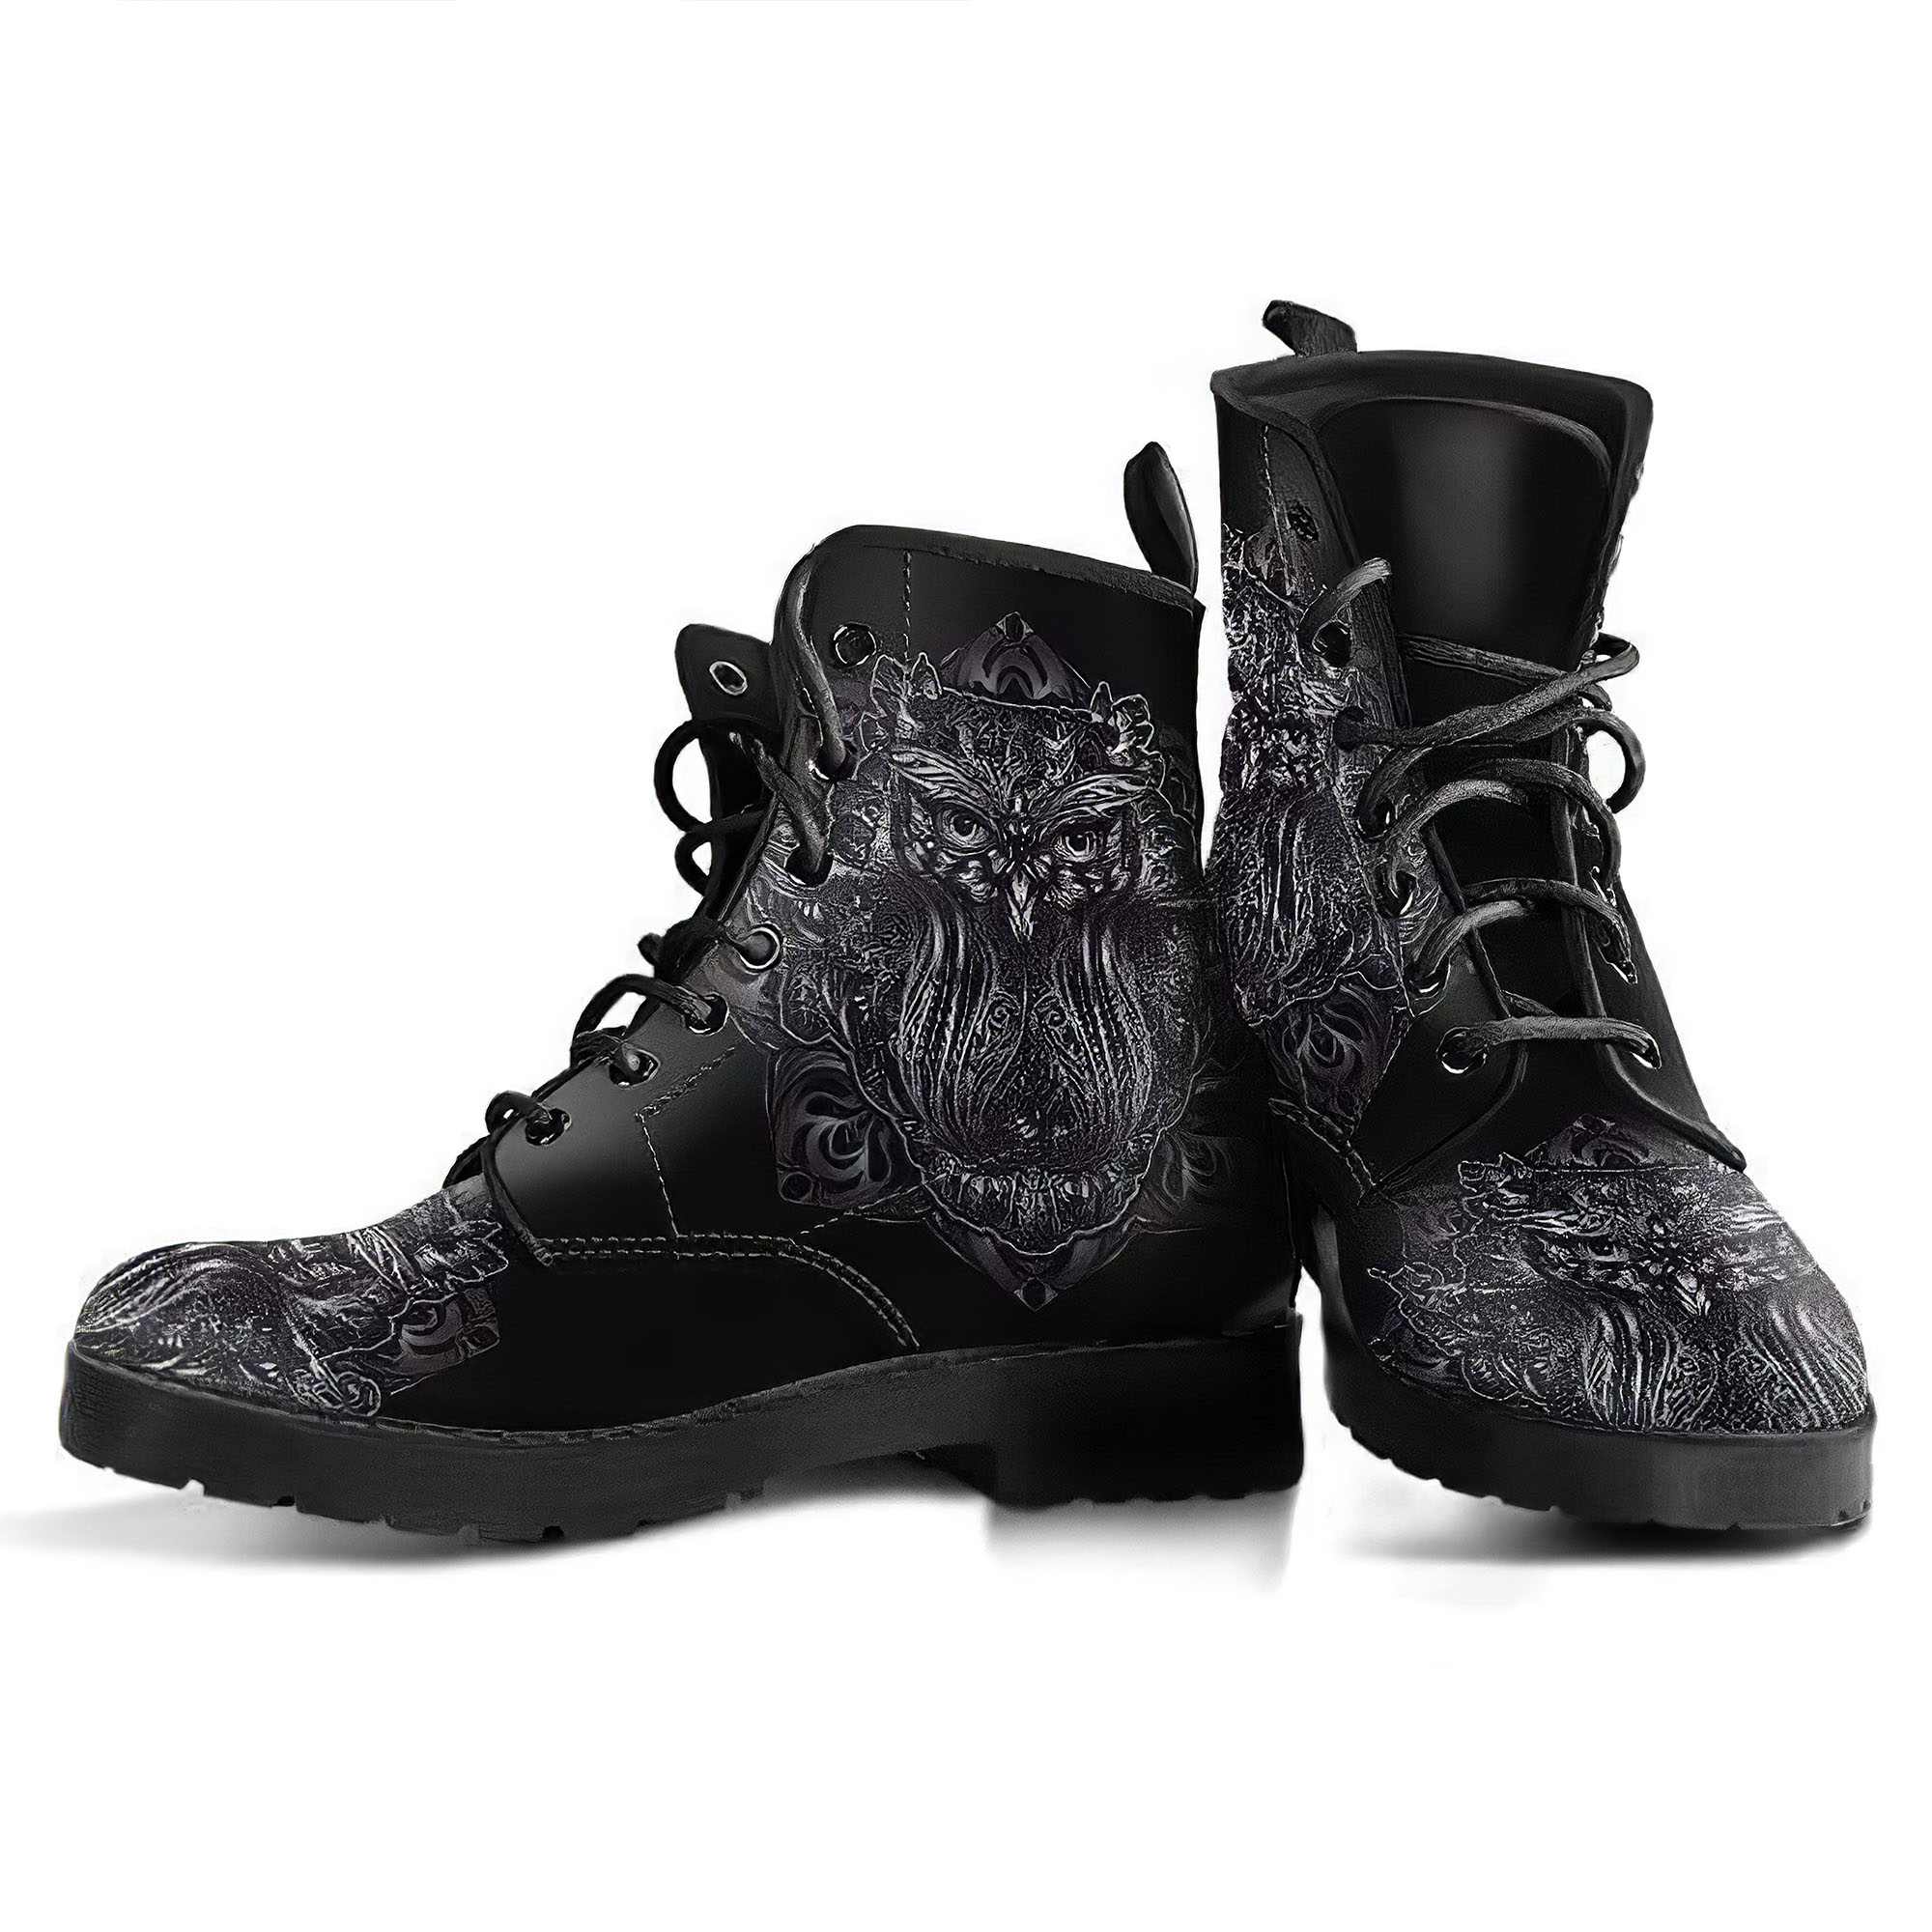 owl-1-handcrafted-boots-gp-main.jpg